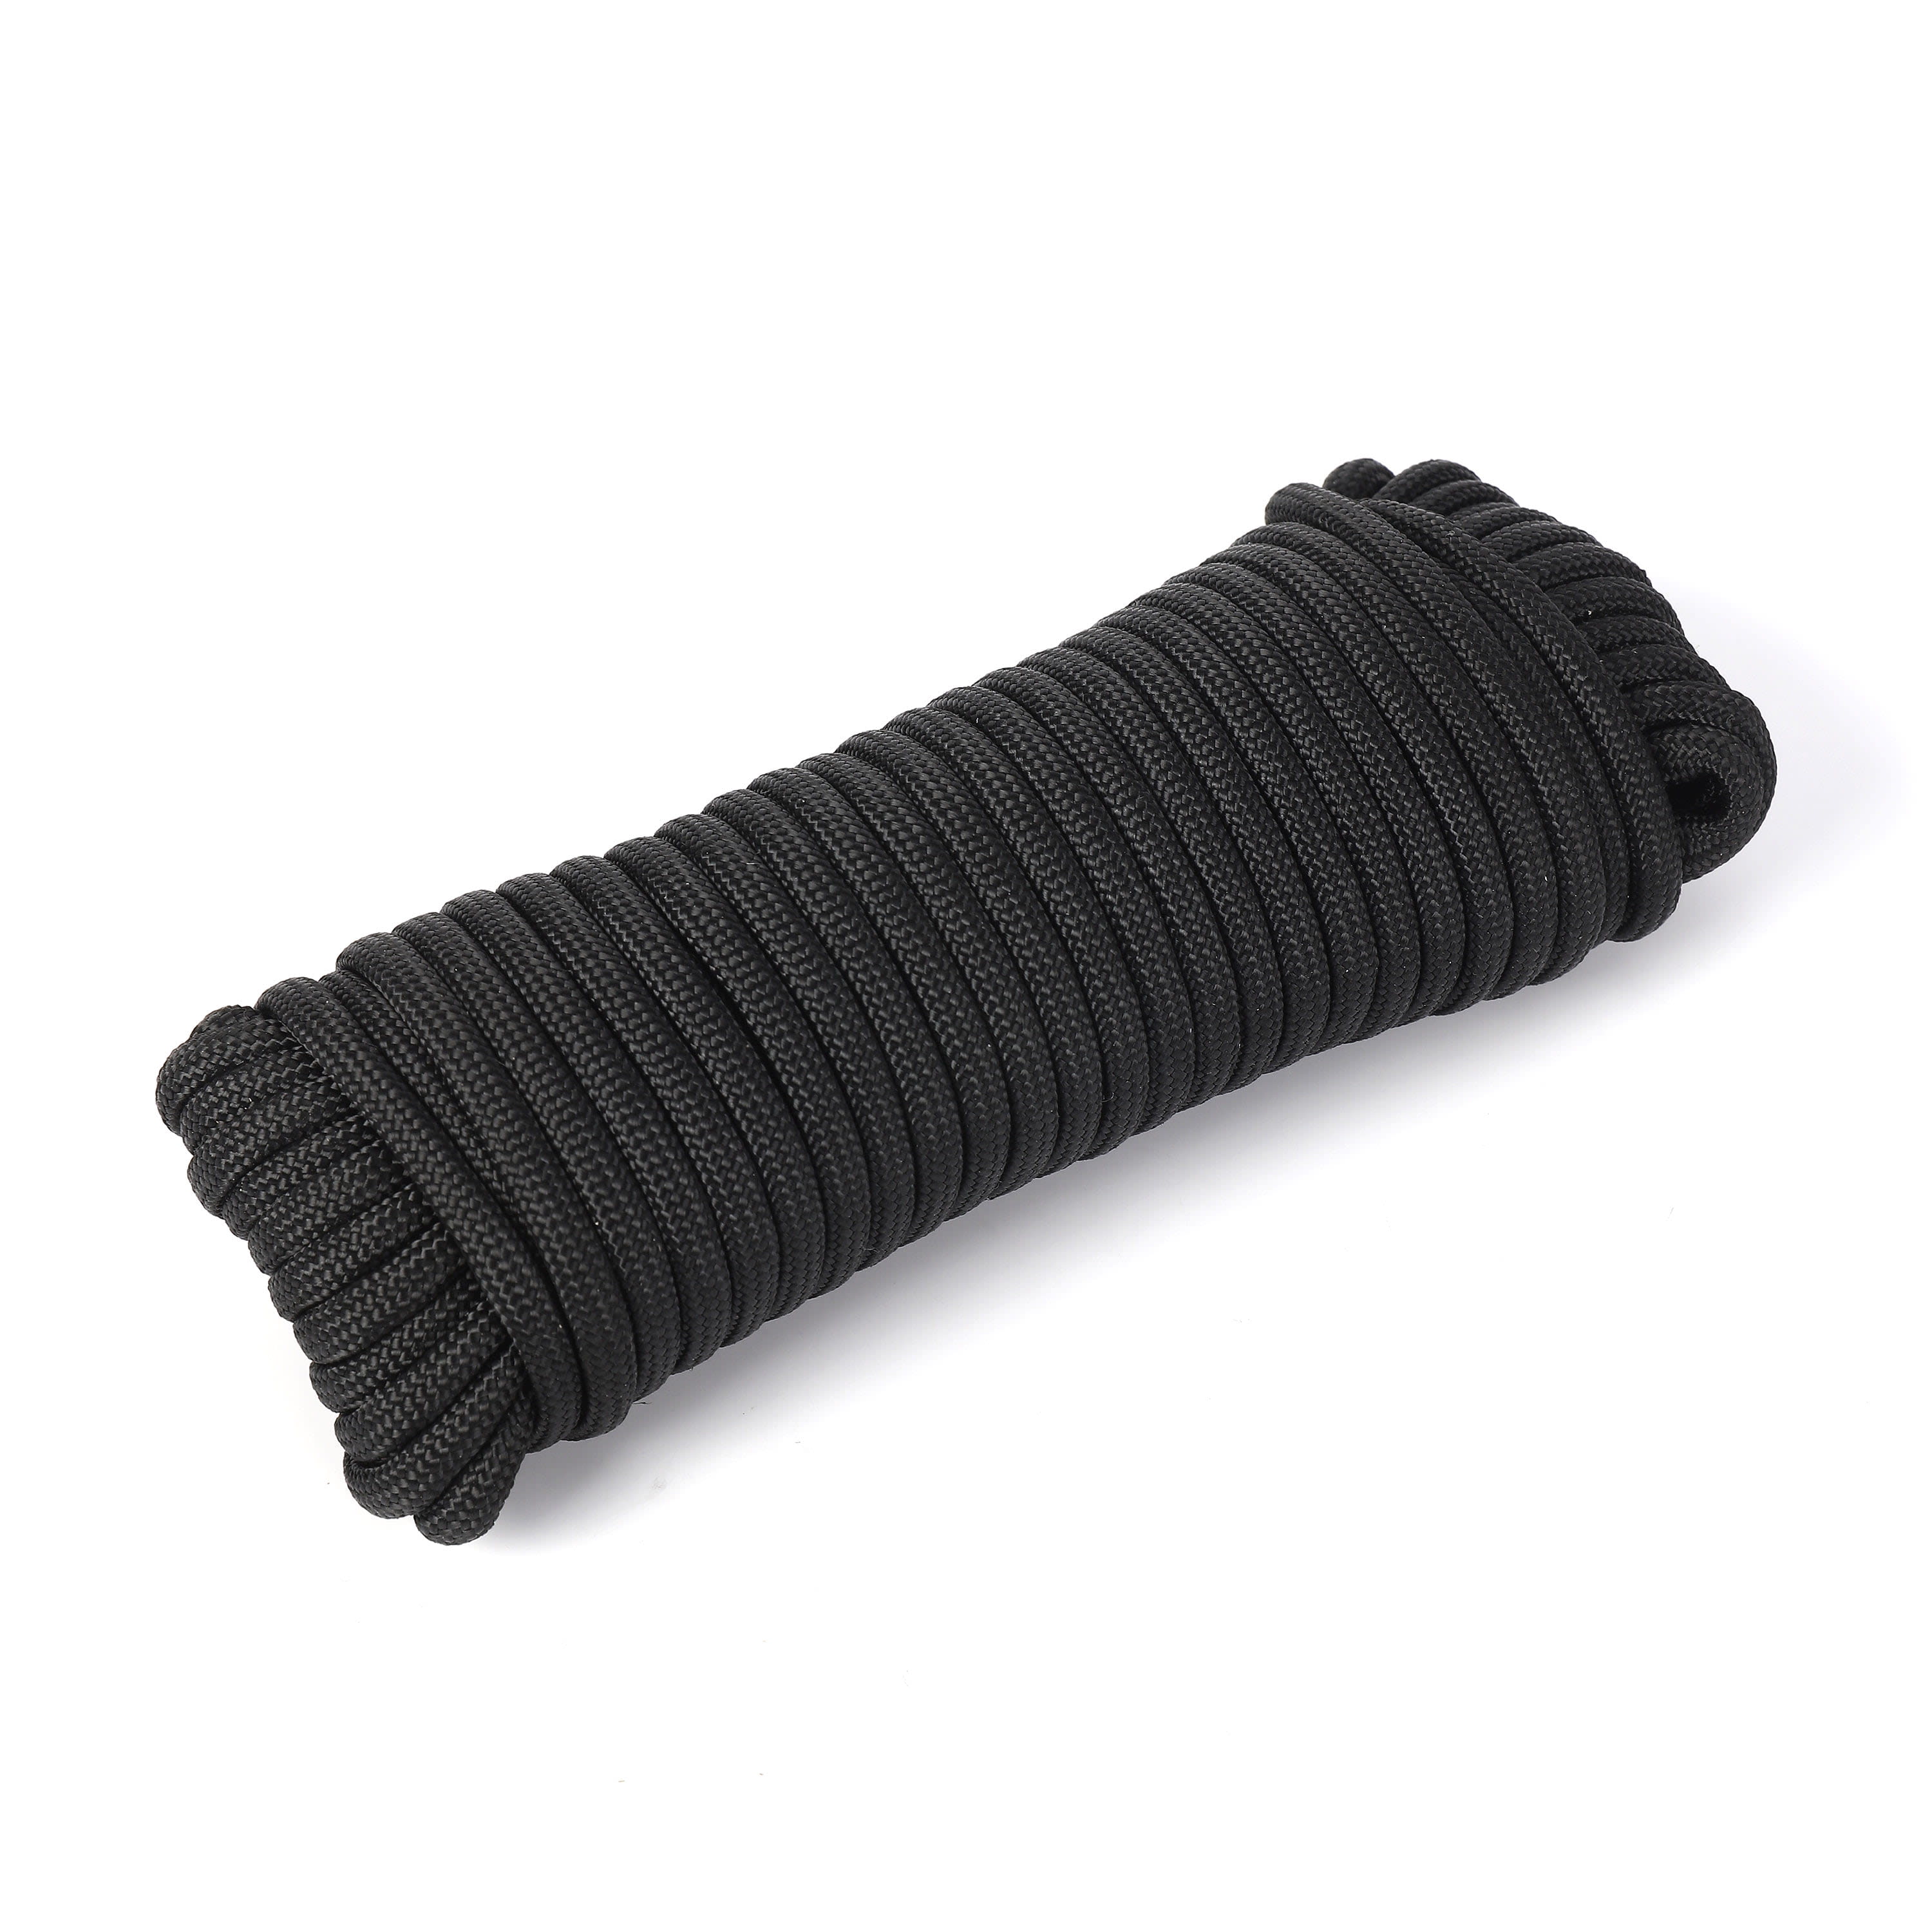 Ozark Trail 50 Foot 1100lbs Paracord Rope, 100% Polyester, Black, Model  2112 - DroneUp Delivery